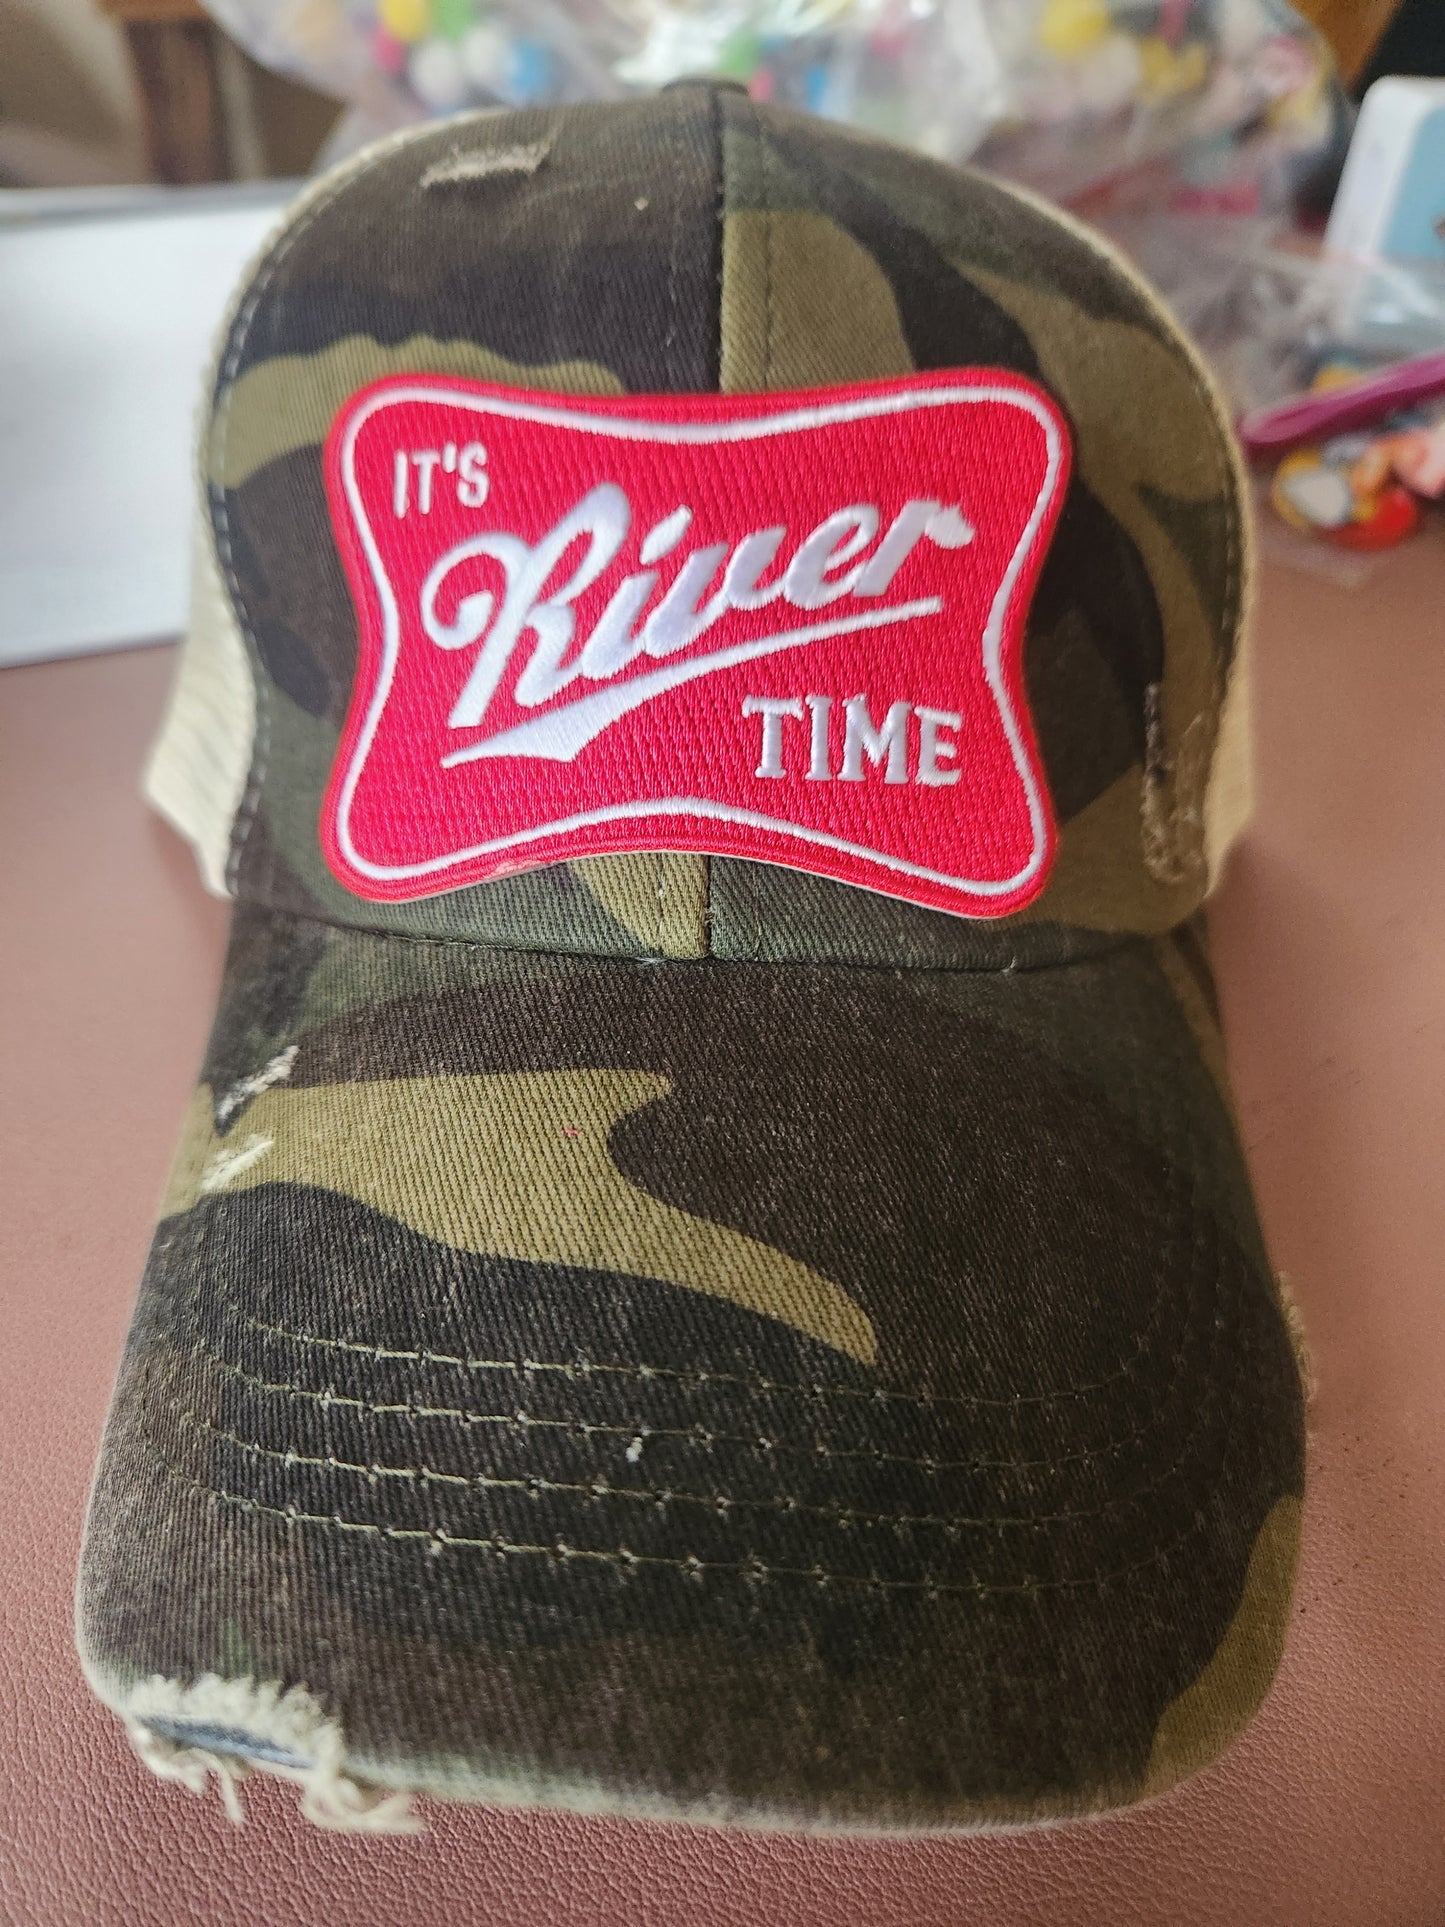 RESTOCK Arriving 5/17 River Time Iron-On PATCH